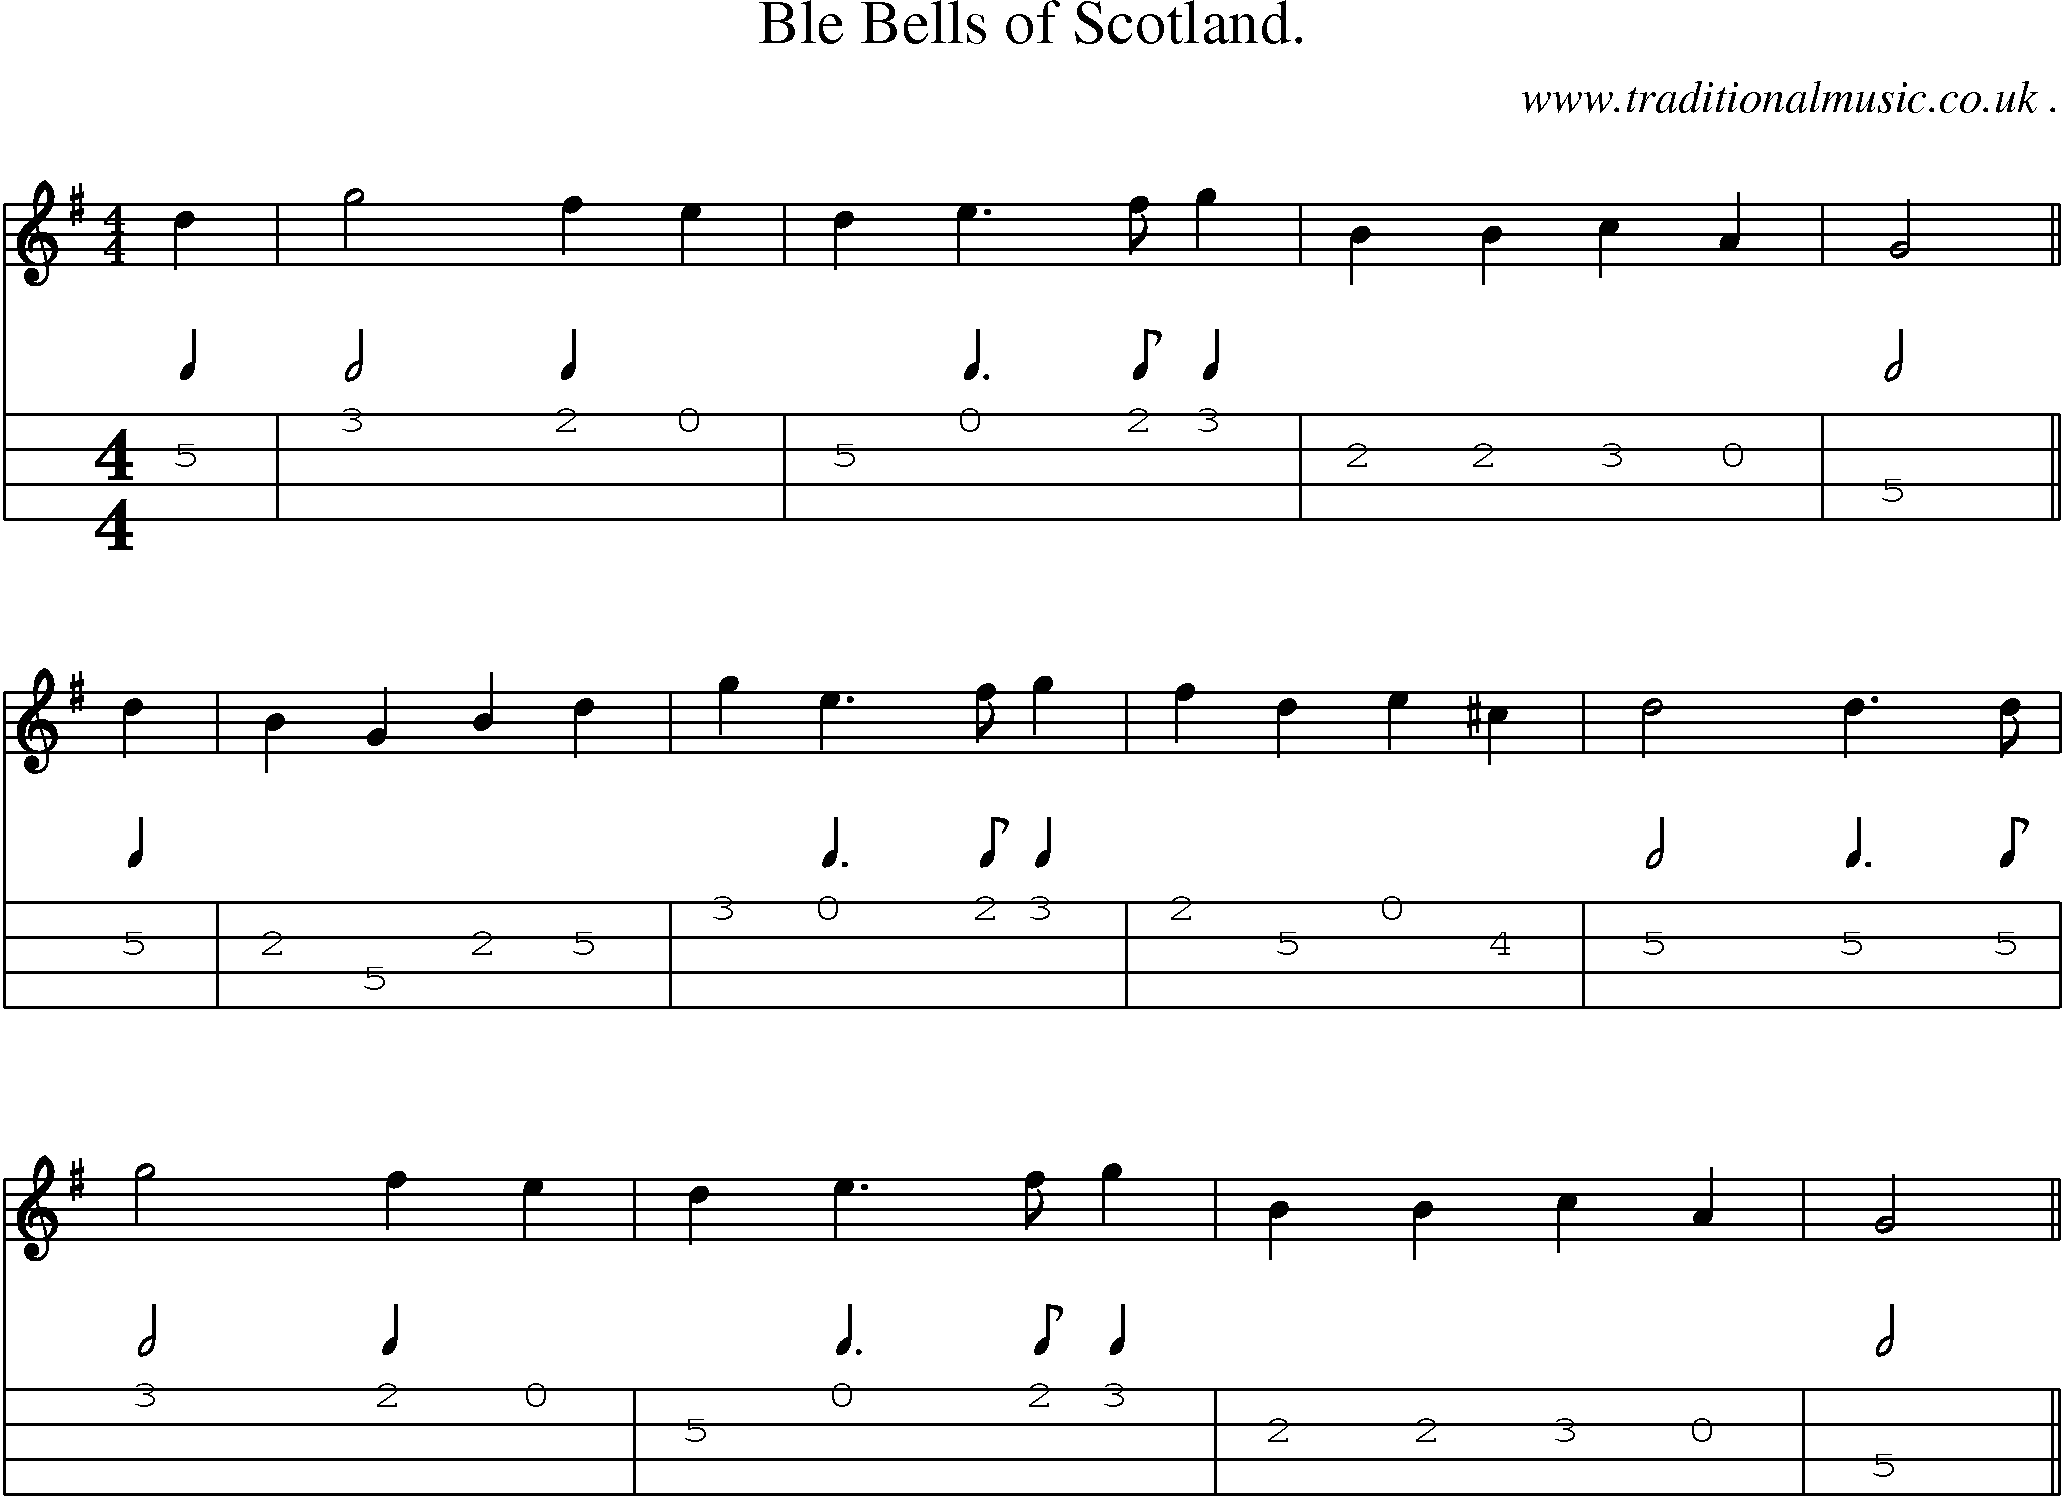 Sheet-Music and Mandolin Tabs for Ble Bells of Scotland 